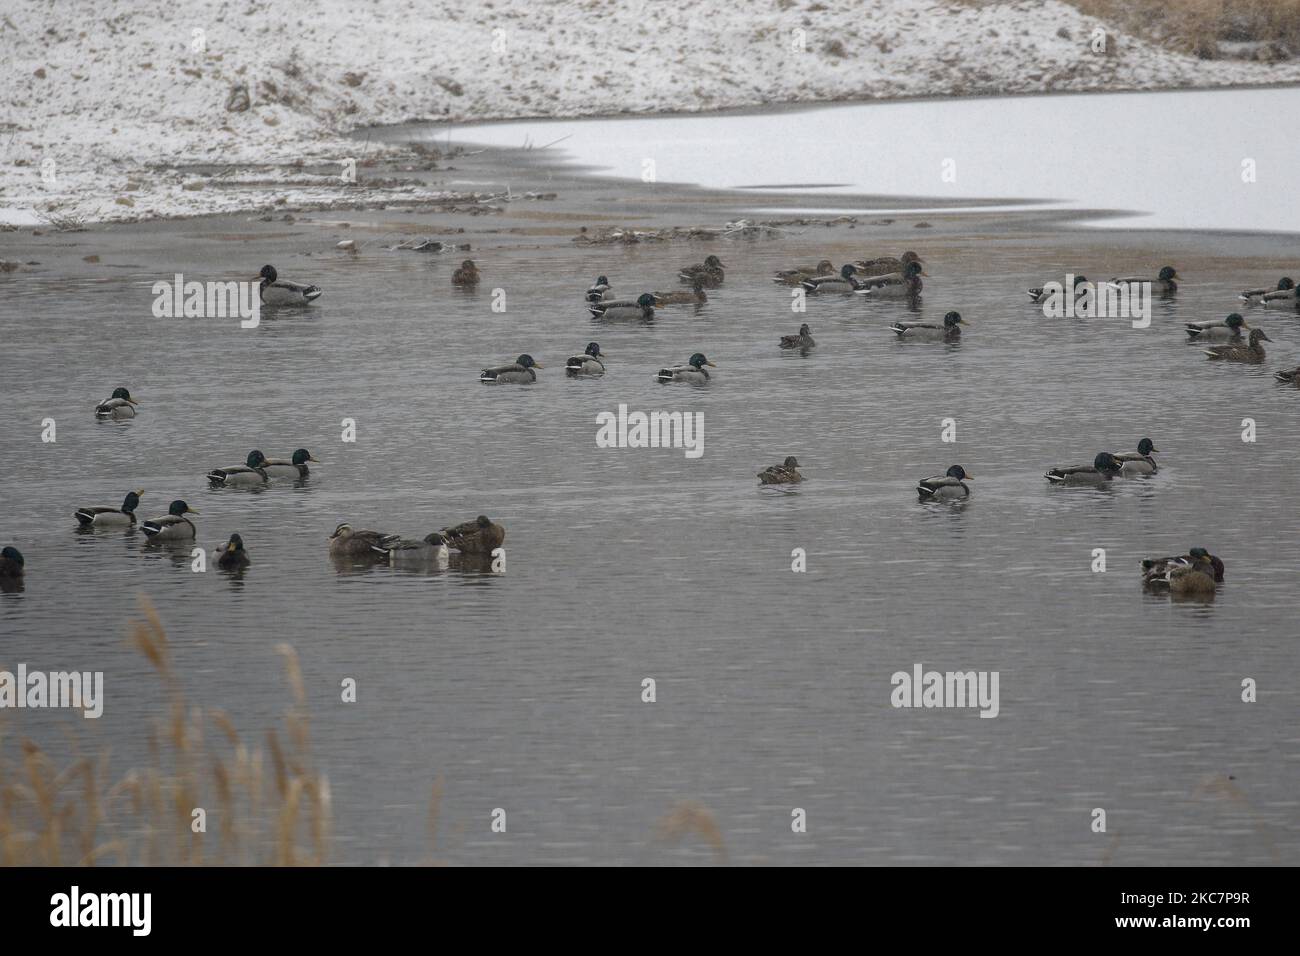 A flock of spotbill ducks swims on waters off stream, a famous wintering site for migratory birds on the Mungyeong, South Korea. South Korea's agricultural ministry said Monday it has completed destroying 18.8 million poultry to prevent the spread of highly pathogenic bird flu among local farms, with the number set to further rise down the road on the piling up of new cases. The country has confirmed 66 cases of the malign H5N8 strain of avian influenza since late November, including the latest case from a duck farm in Gimje, about 260 kilometers southwest of Seoul, the previous day, according Stock Photo